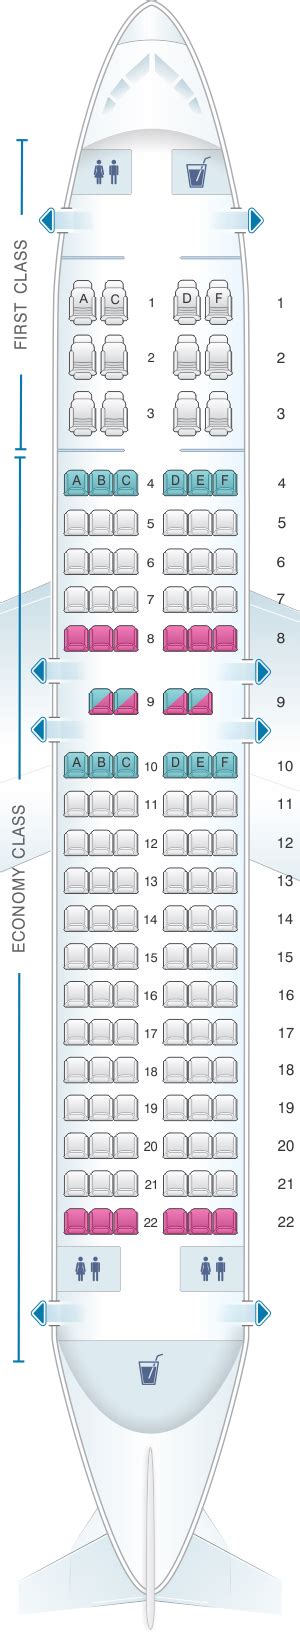 Seat Map American Airlines Airbus A319 124pax Seatmaestro